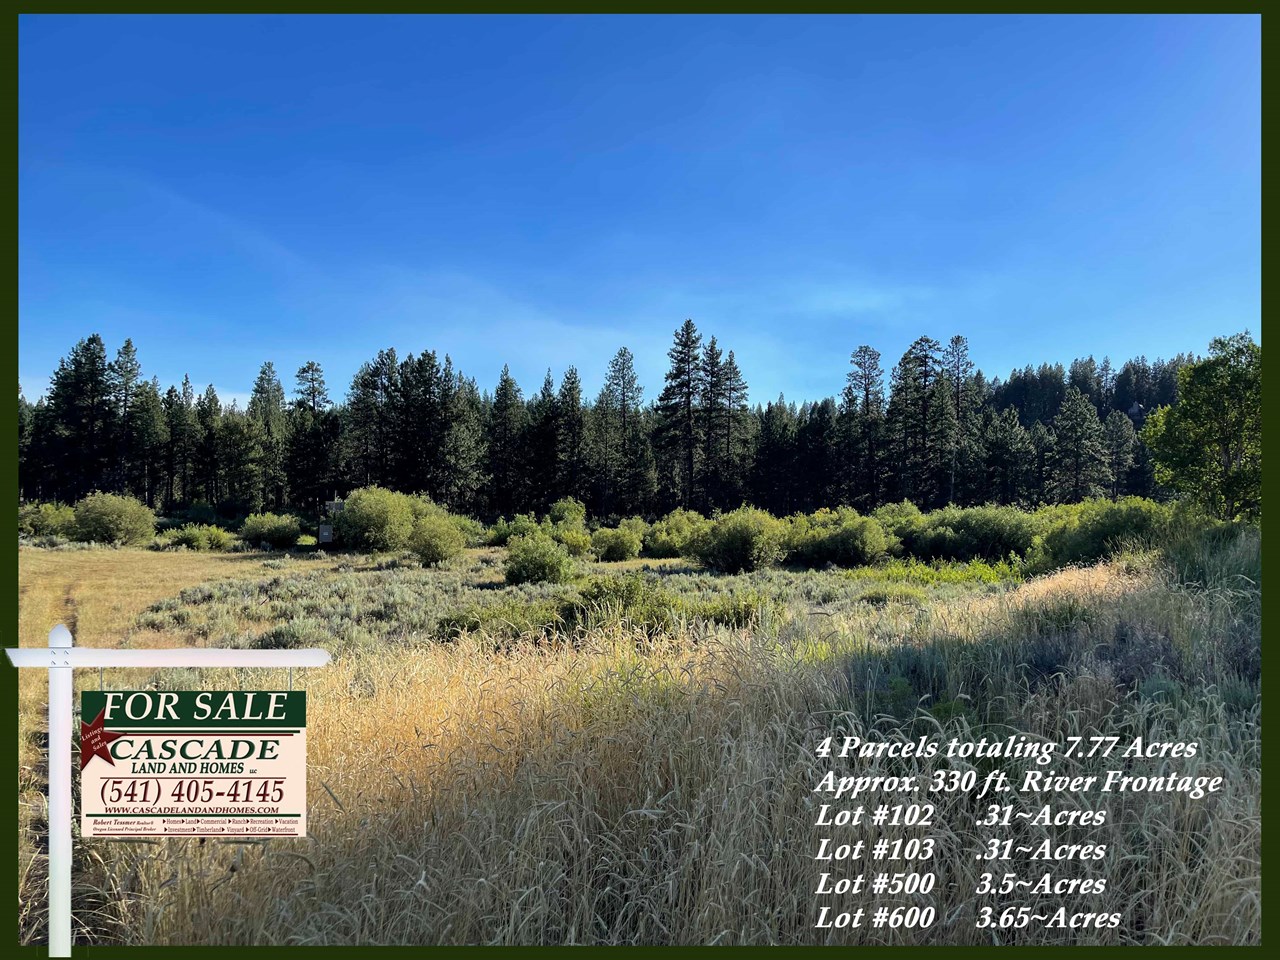 looking  across the property toward the u.s. forest service land that borders the property. the west side of the property is usfs land, adding to the incredible privacy of the property. 



mls # 220156878 
lot #102, #103
2610/2620 south chiloquin road, chiloquin, oregon